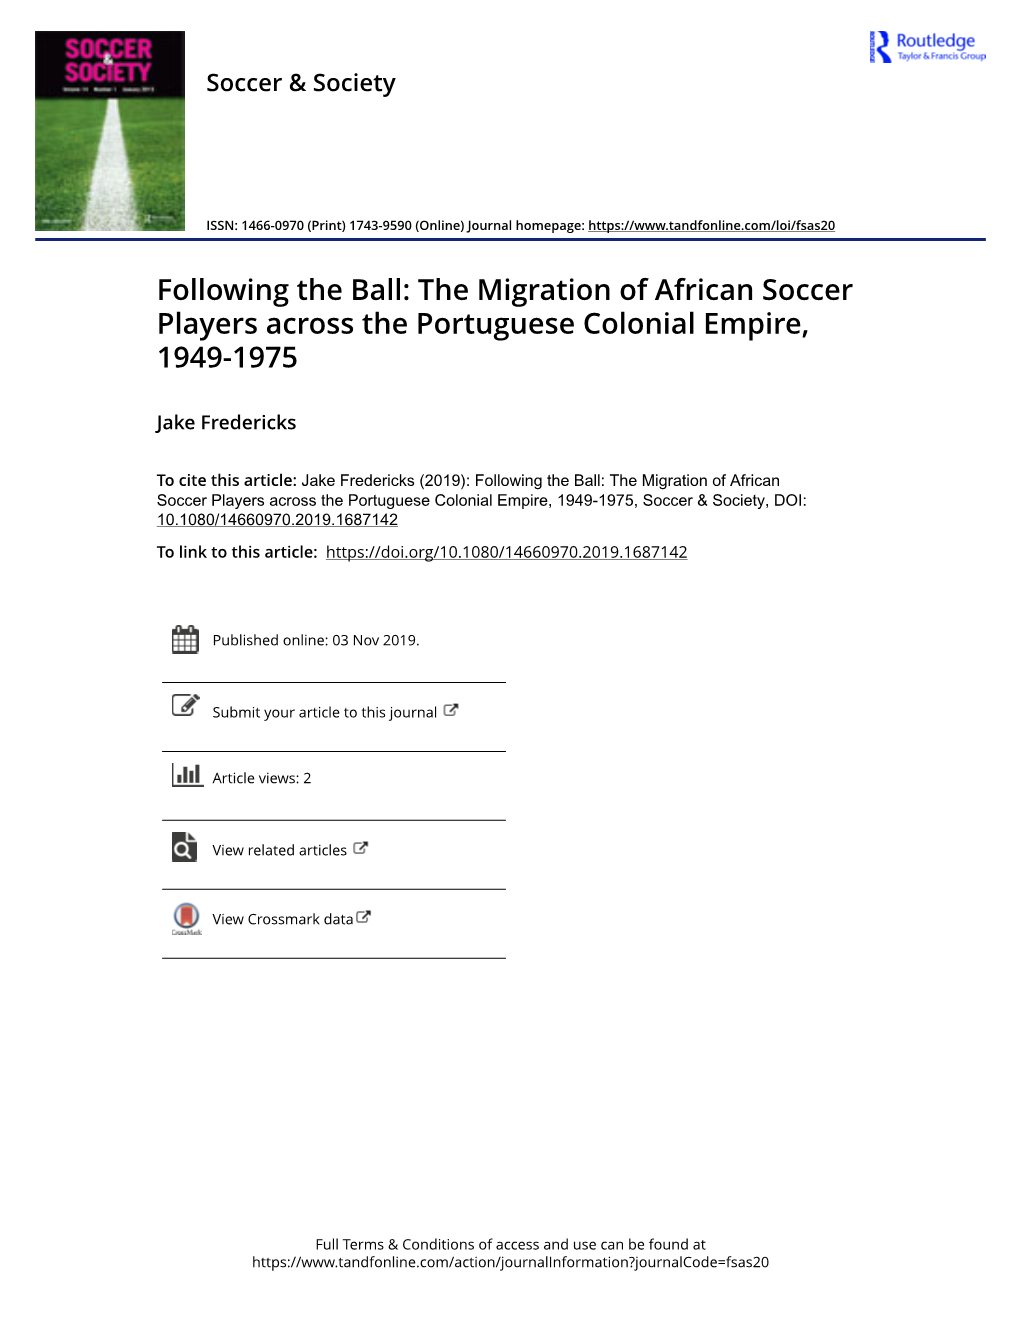 Following the Ball: the Migration of African Soccer Players Across the Portuguese Colonial Empire, 1949-1975